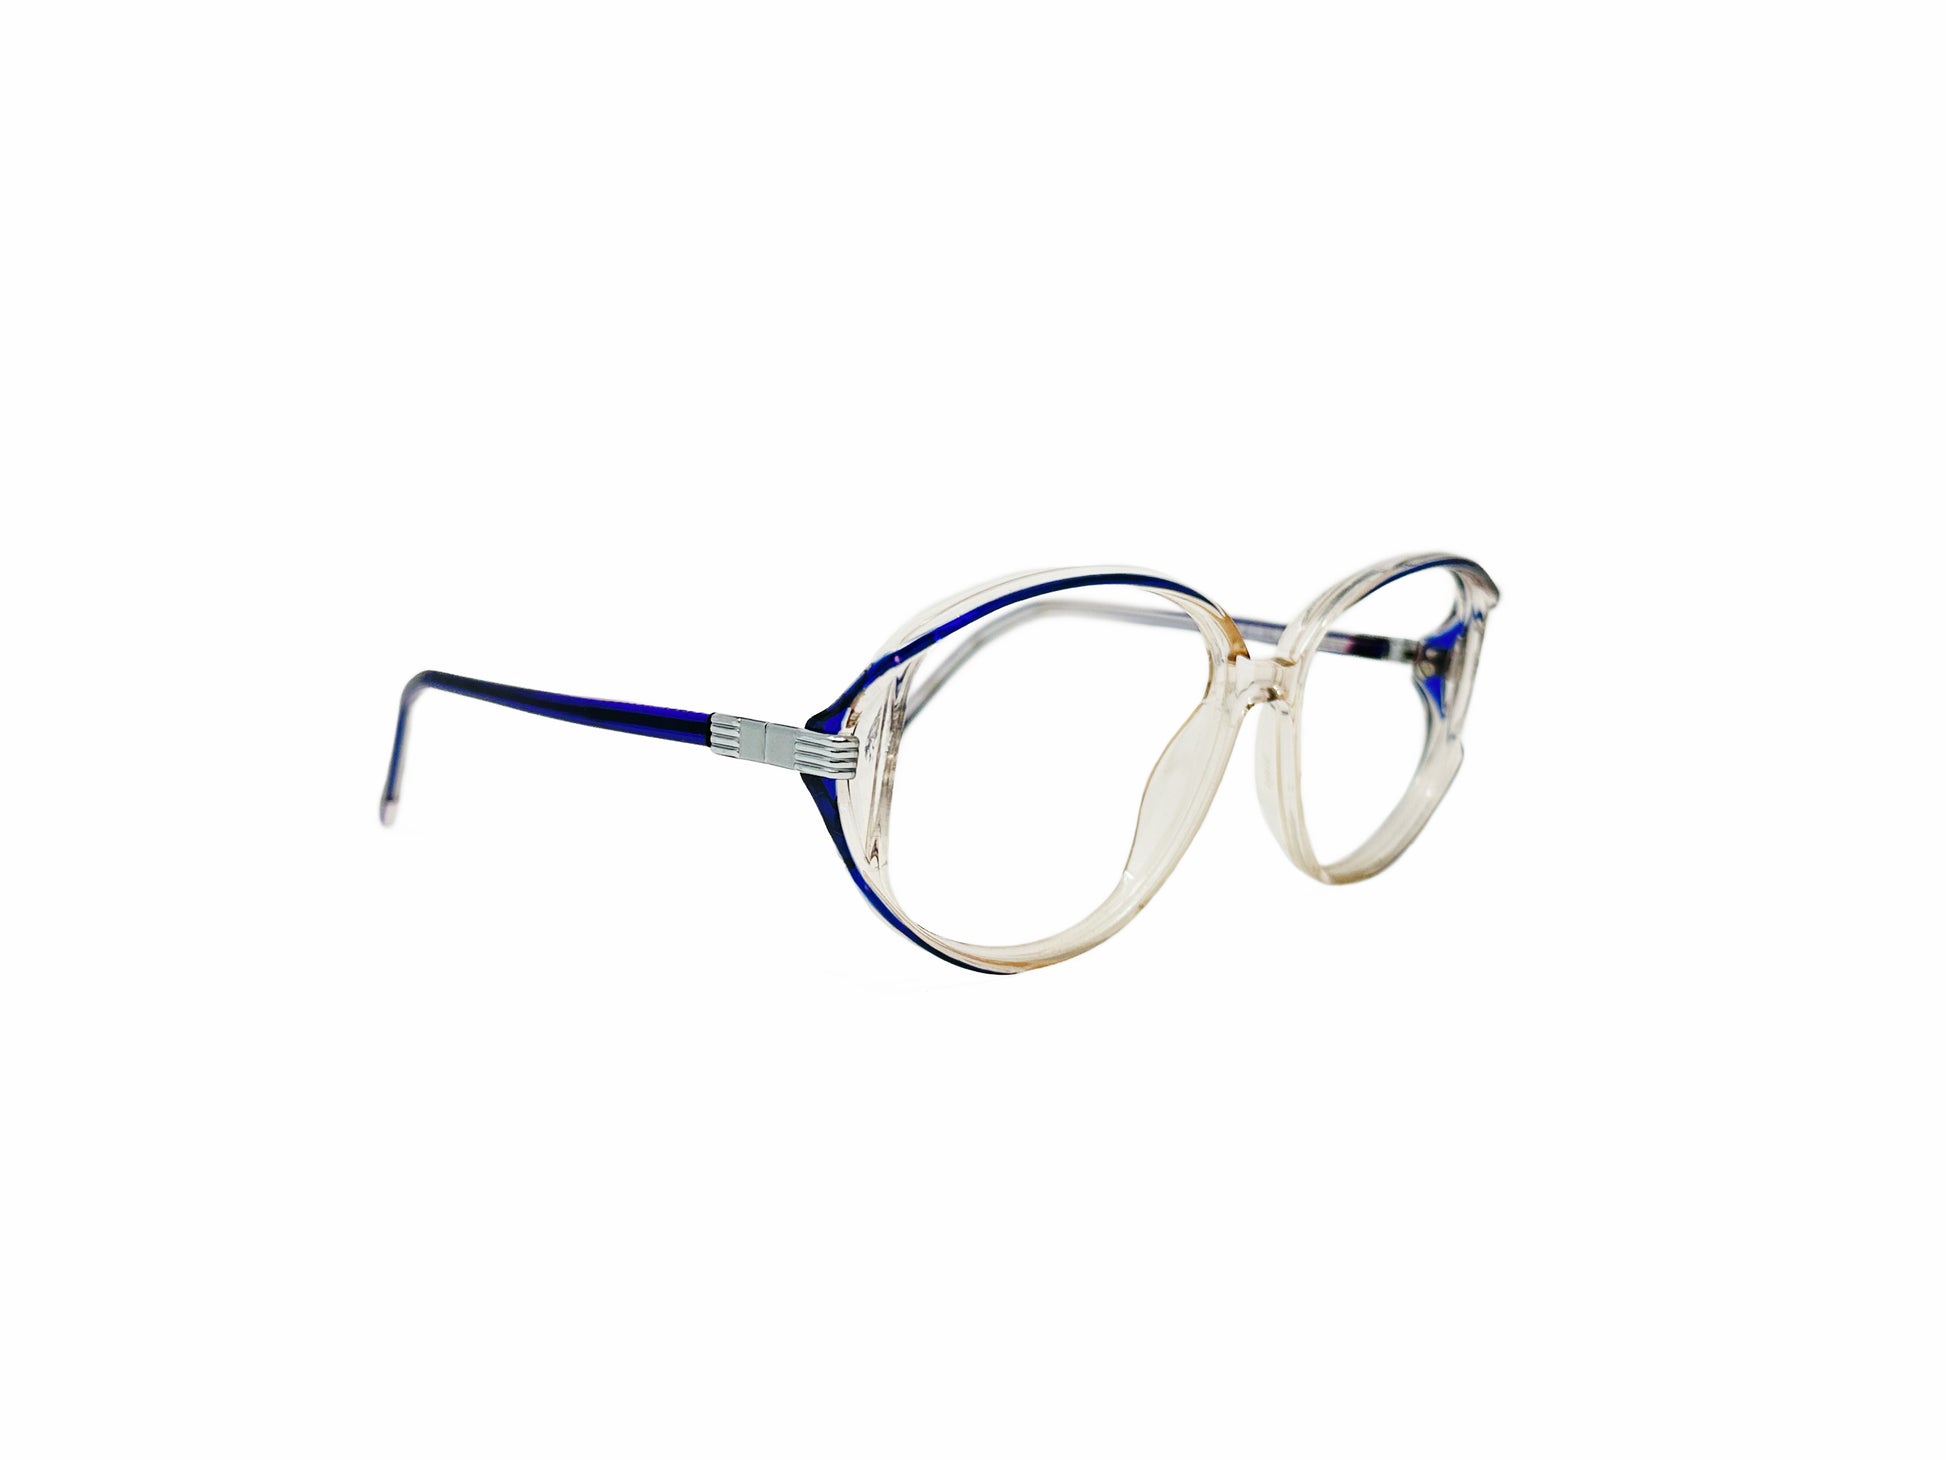 Wilshire Designs acetate butterfly optical frame. Model: WD869. Color: BLV - Transparent with blue accent on top of frame. Side view.